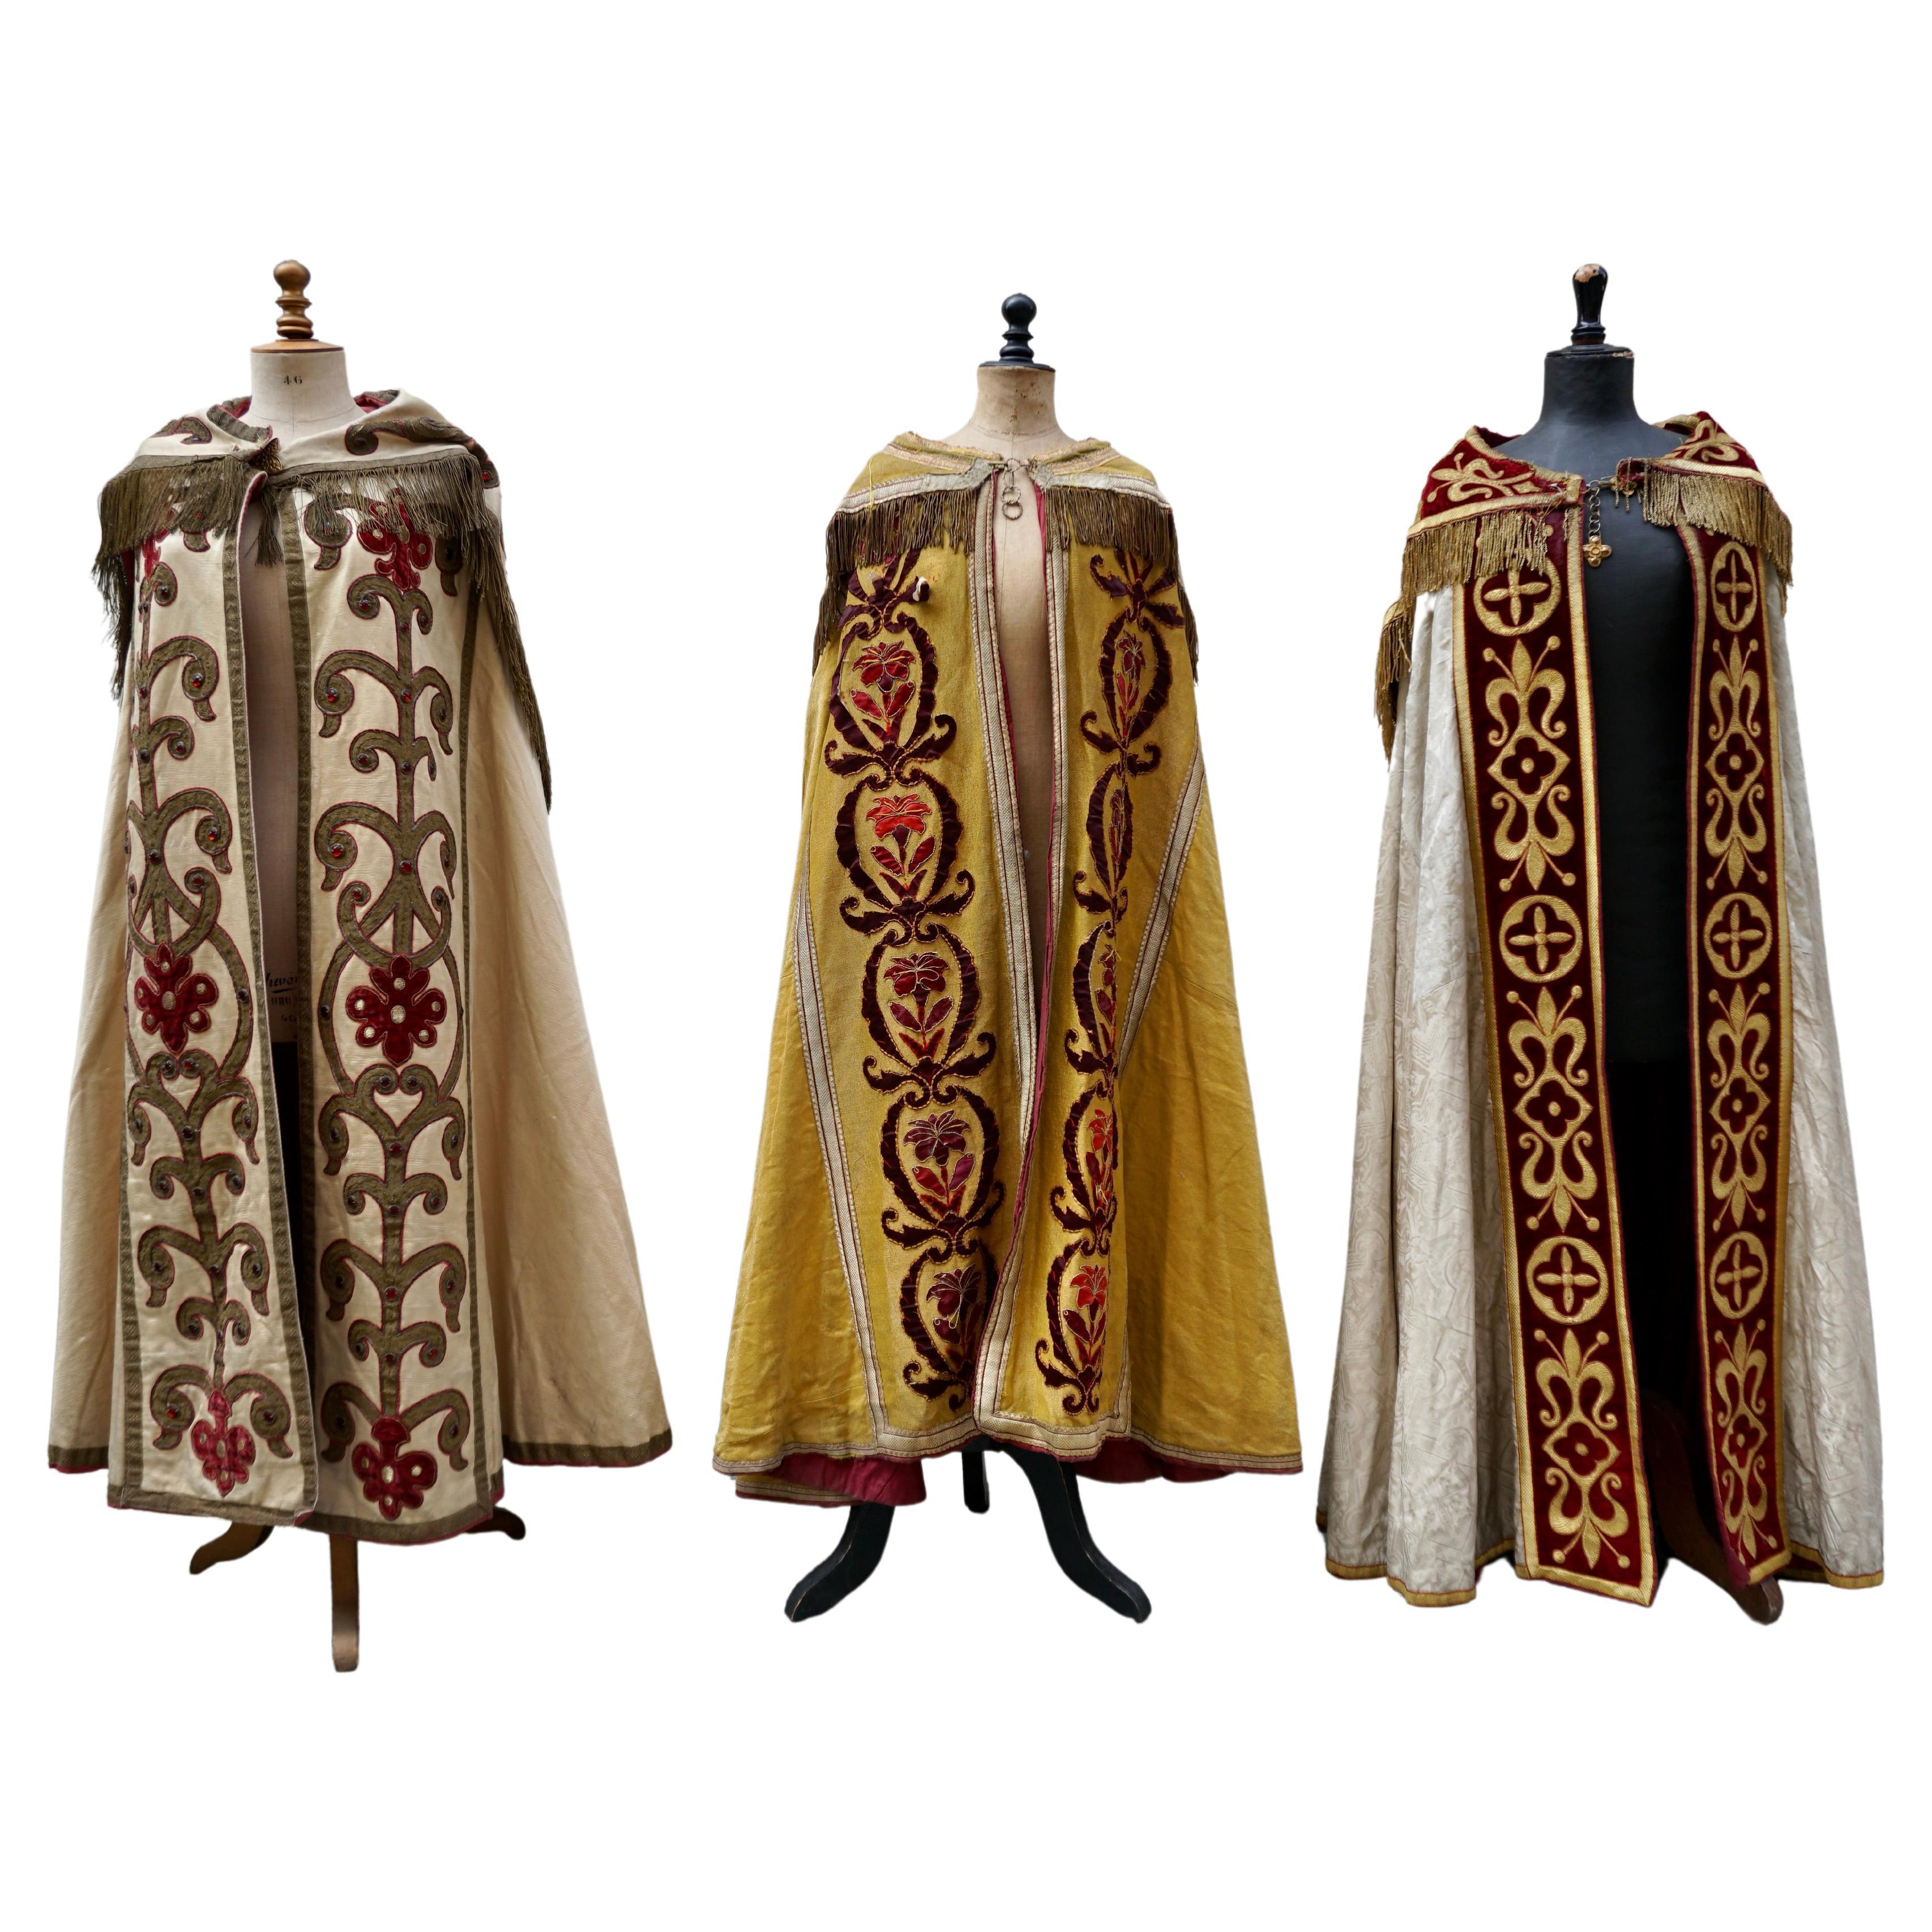 Three beautiful early 19th century religious Christian choir cap or chasubles for priest, woven with golden metallic wires, and beautiful floral design.These chasubles were used in the church as choir uniforms for special Catholic occasions.
Roman